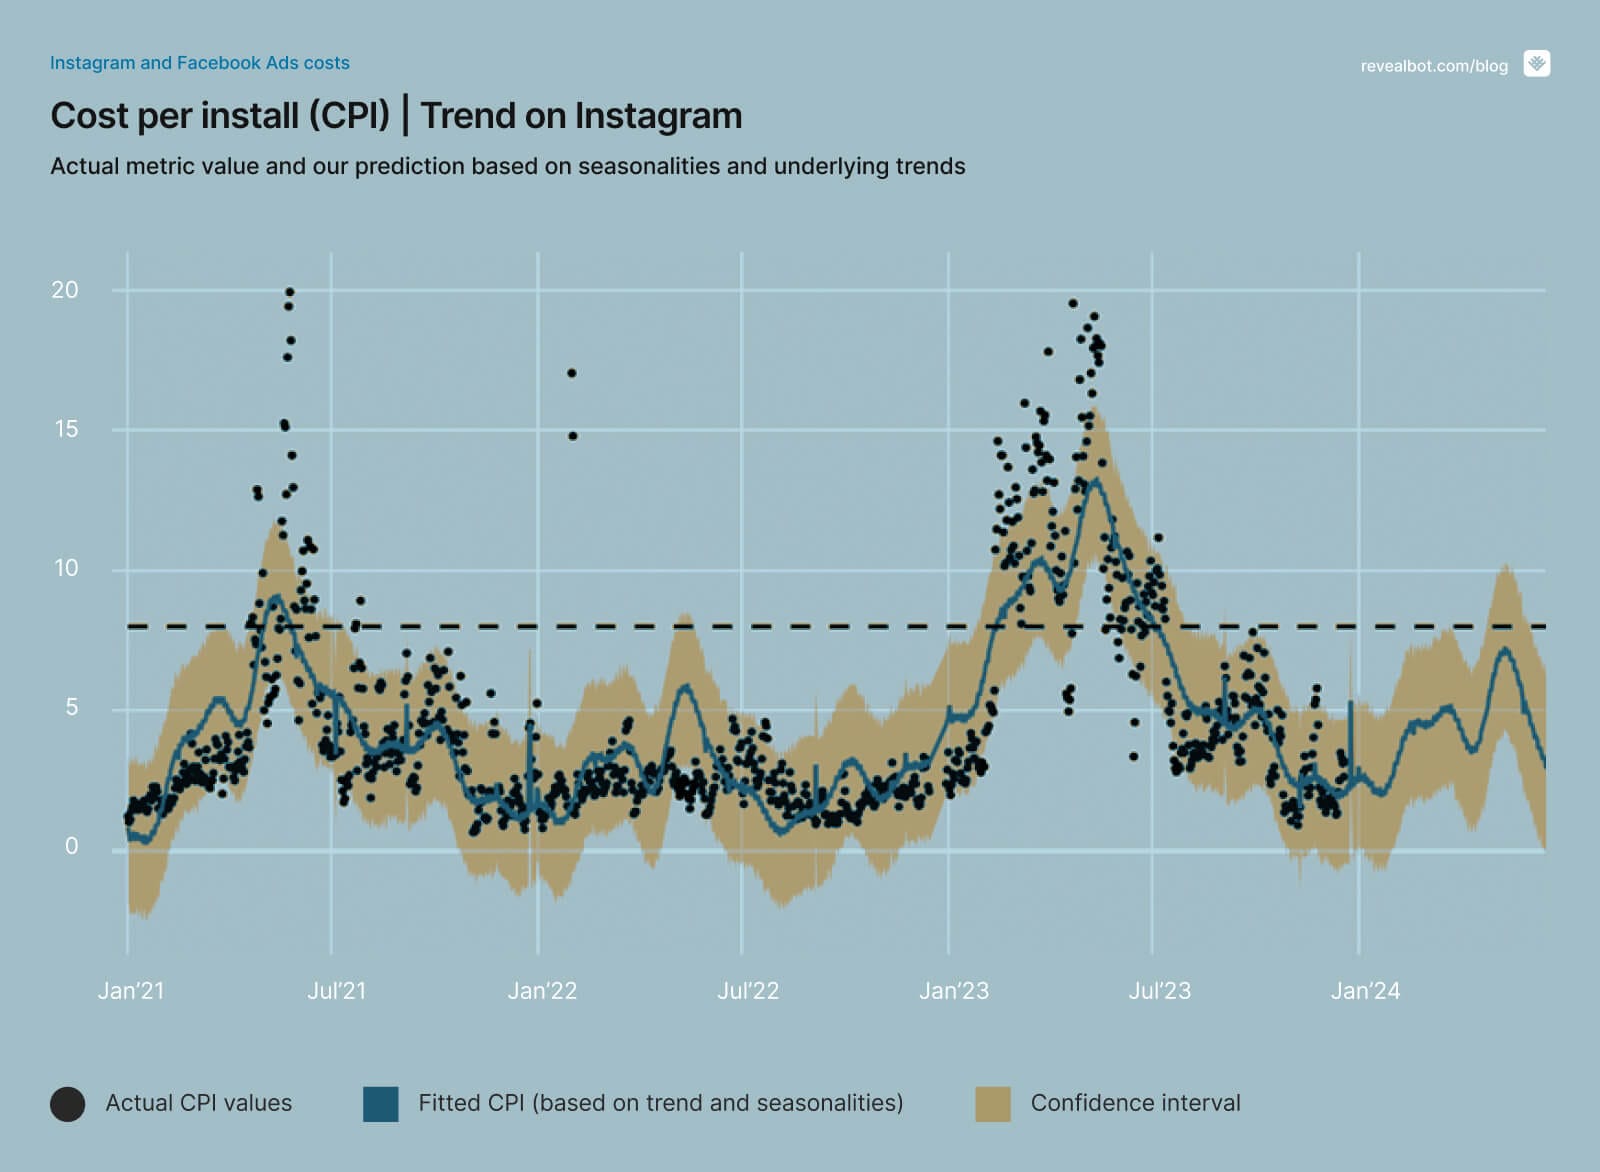 Instagram and Facebook Ad costs: A complete 3-year analysis of the key metrics